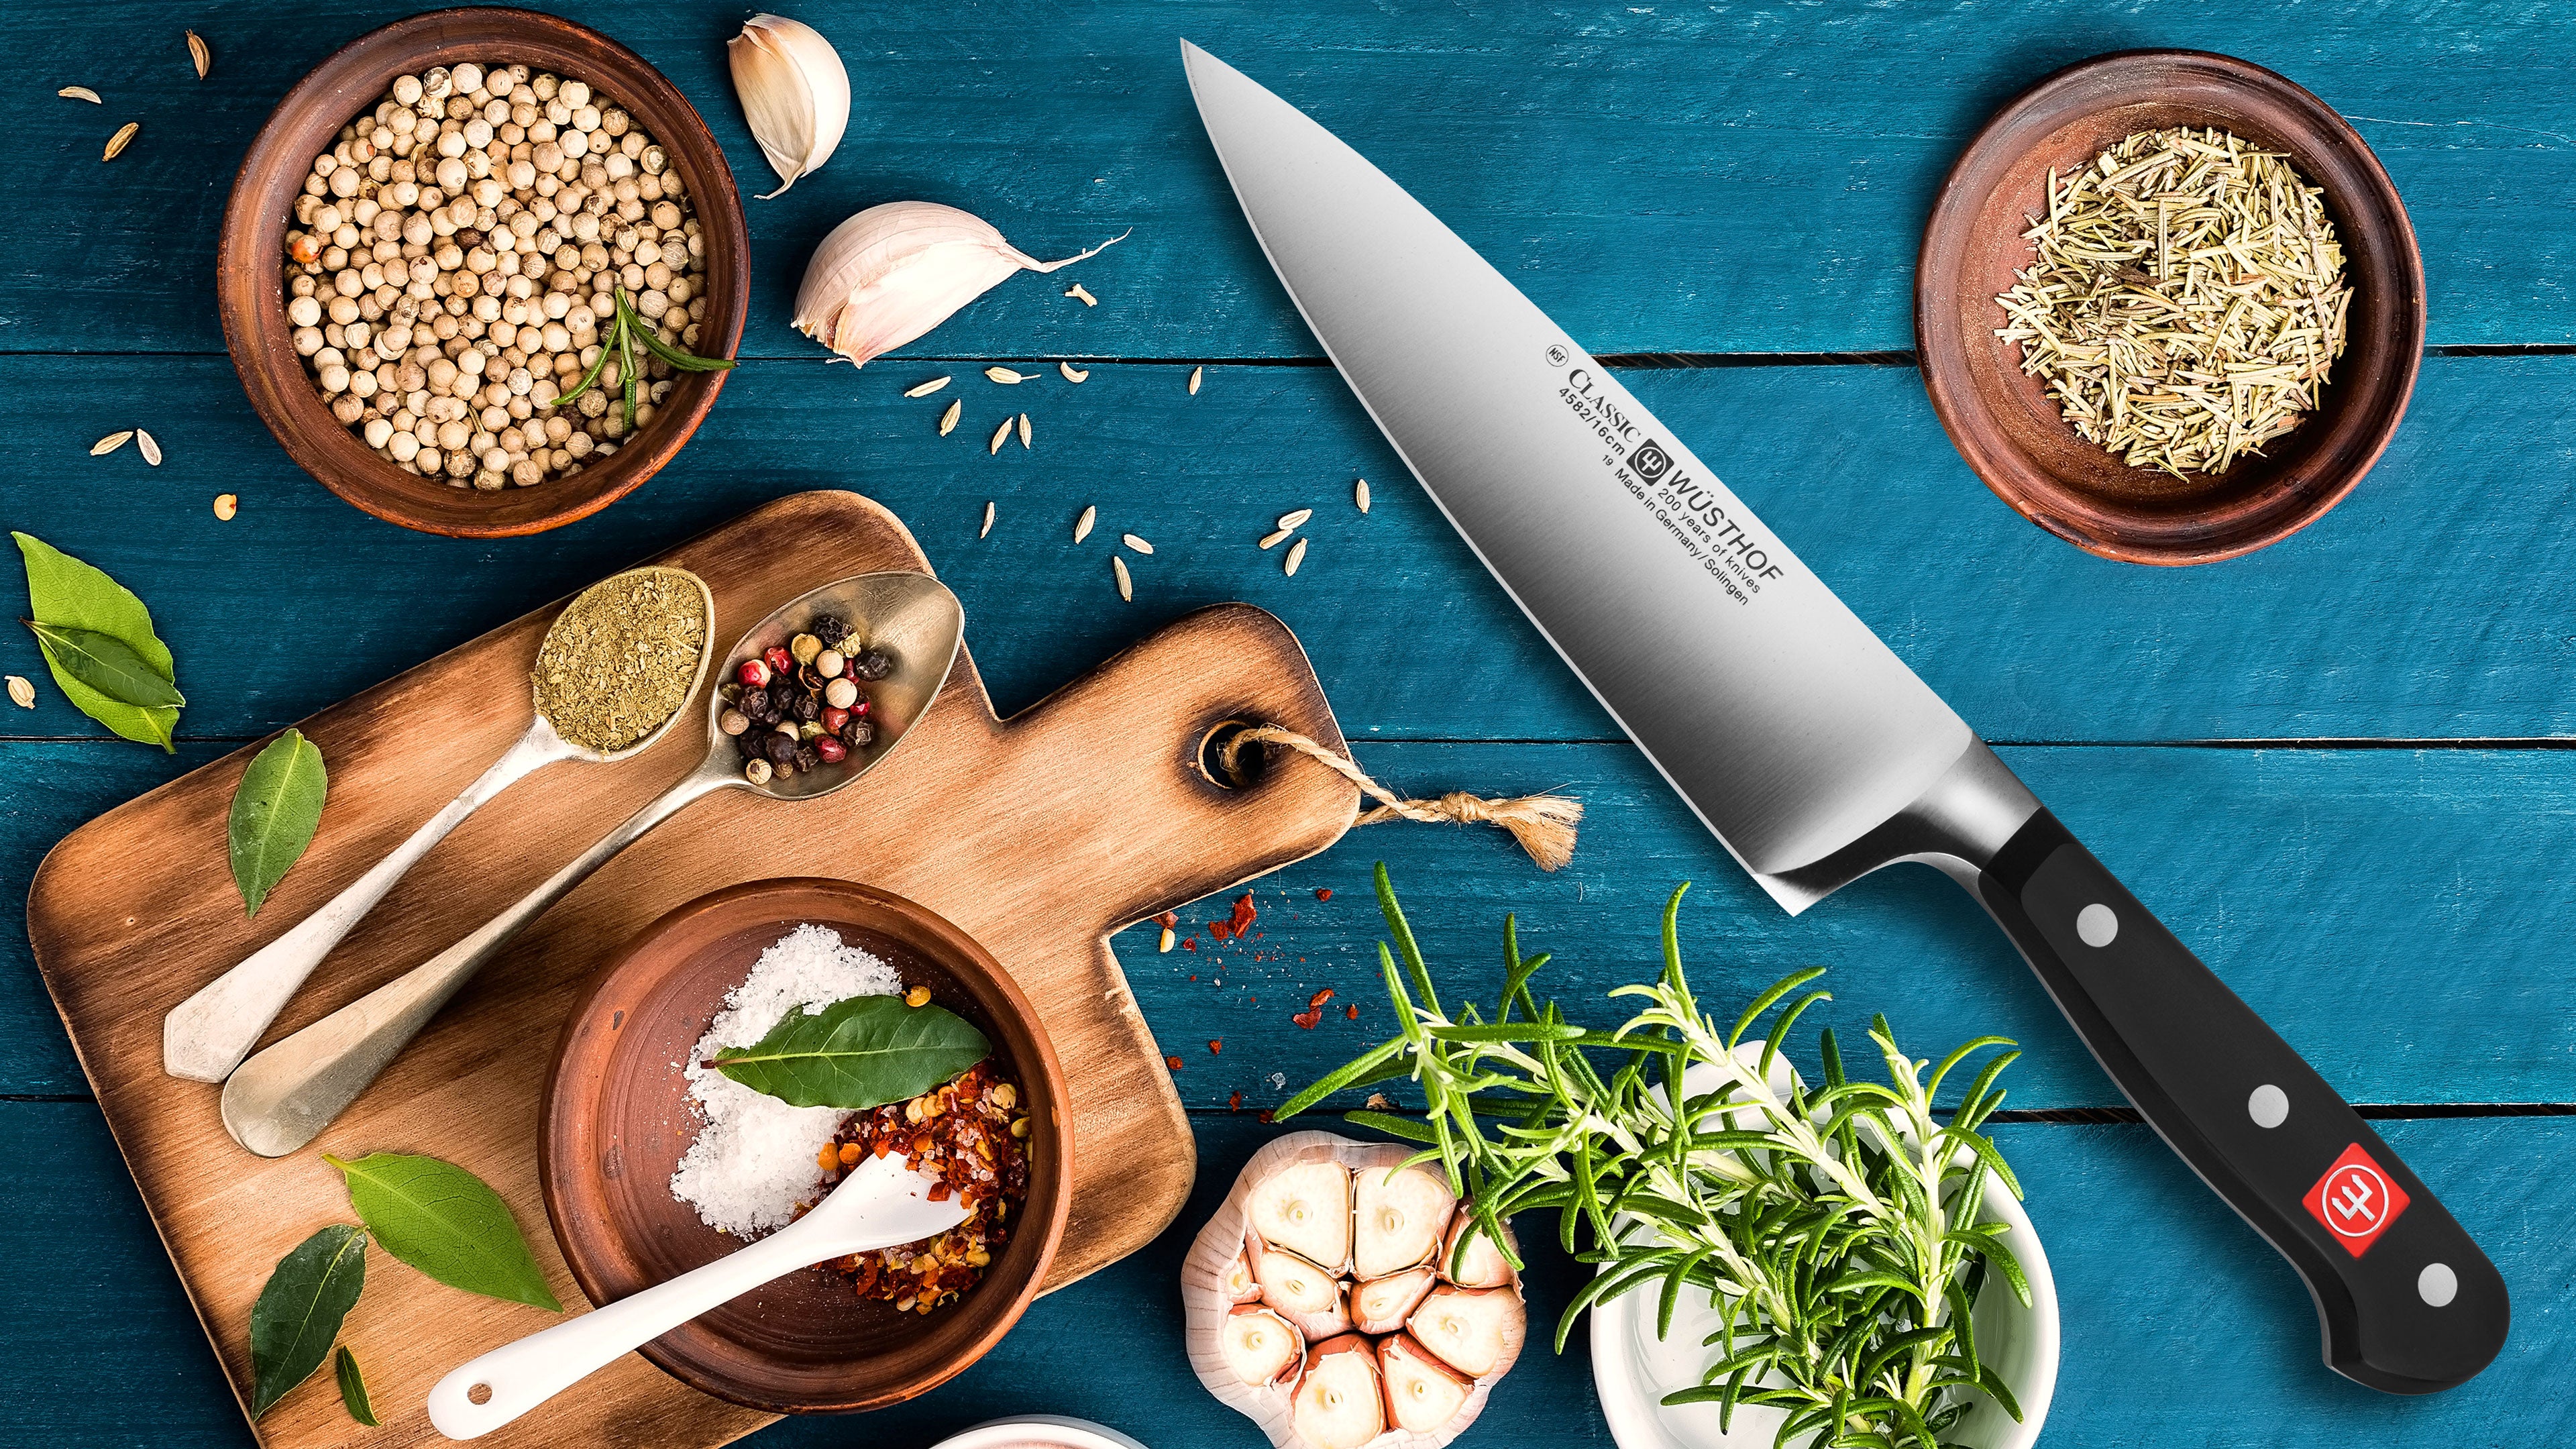 How to find the best chef knife - Work Sharp Sharpeners